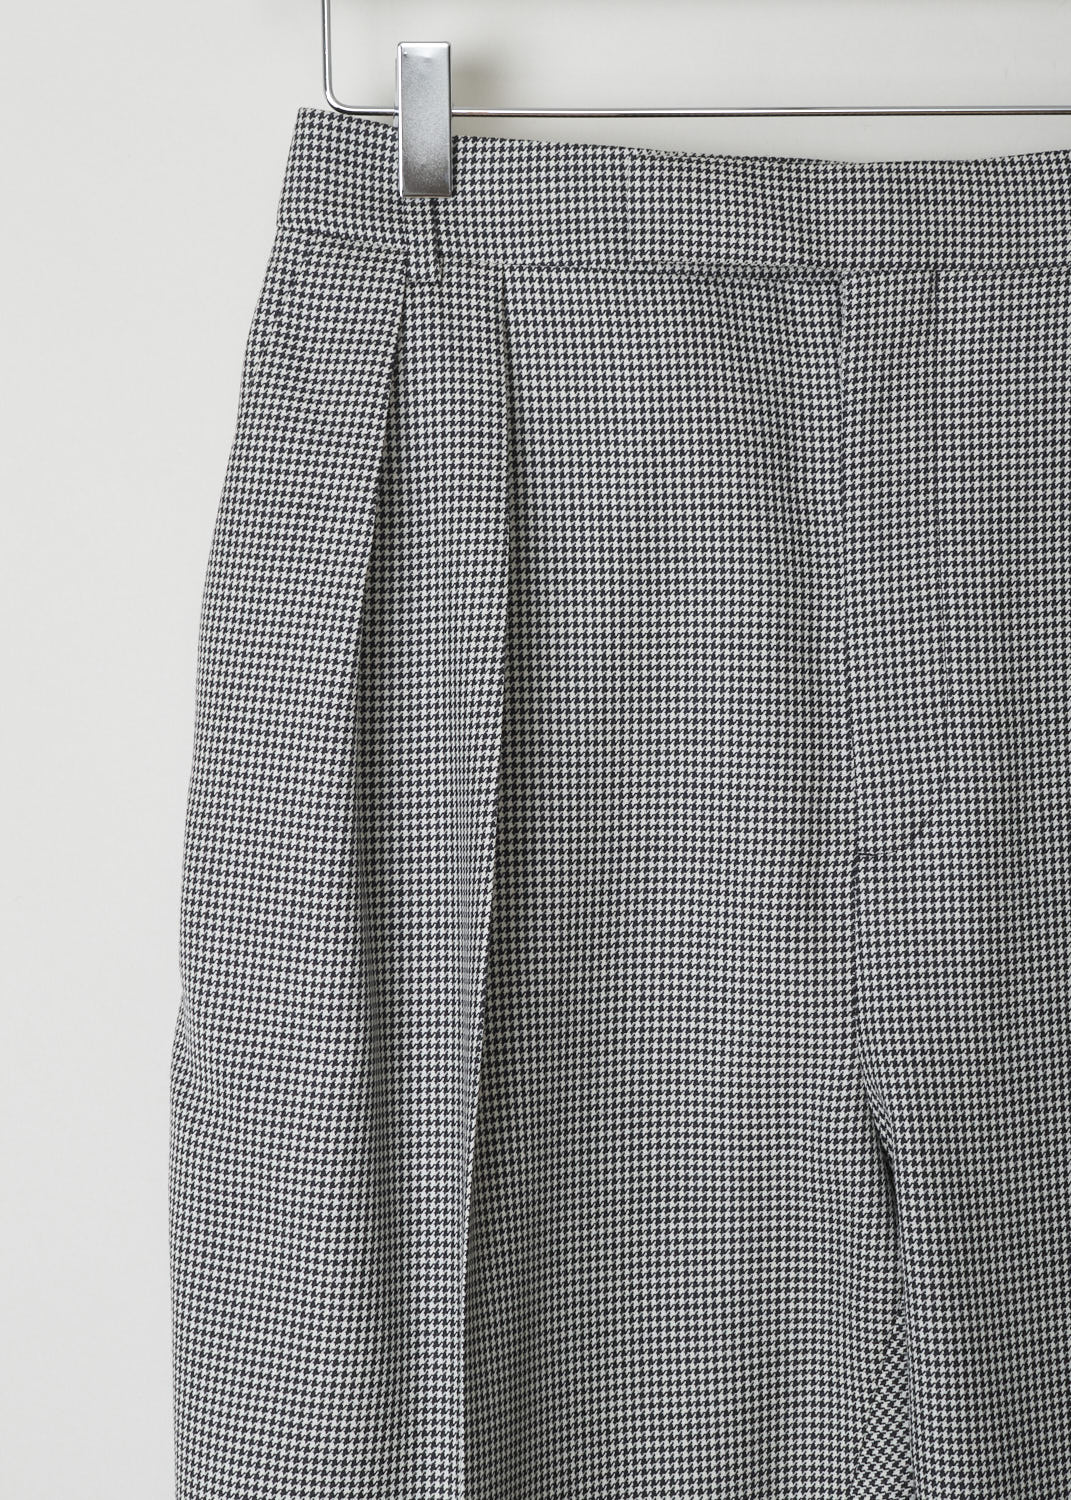 CELINE, HOUNDSTOOTH TROUSERS WITH FRONT PLEATS, 026D_2P106_18BN, Print, Black, White, Detail, Black and white Houndstooth trousers. These trousers have a concealed clasp and zipper closure. Slanted pockets can be found on either side. Front pleats decorate the tapered pant legs. In the back, two buttoned welt pockets can be found.
